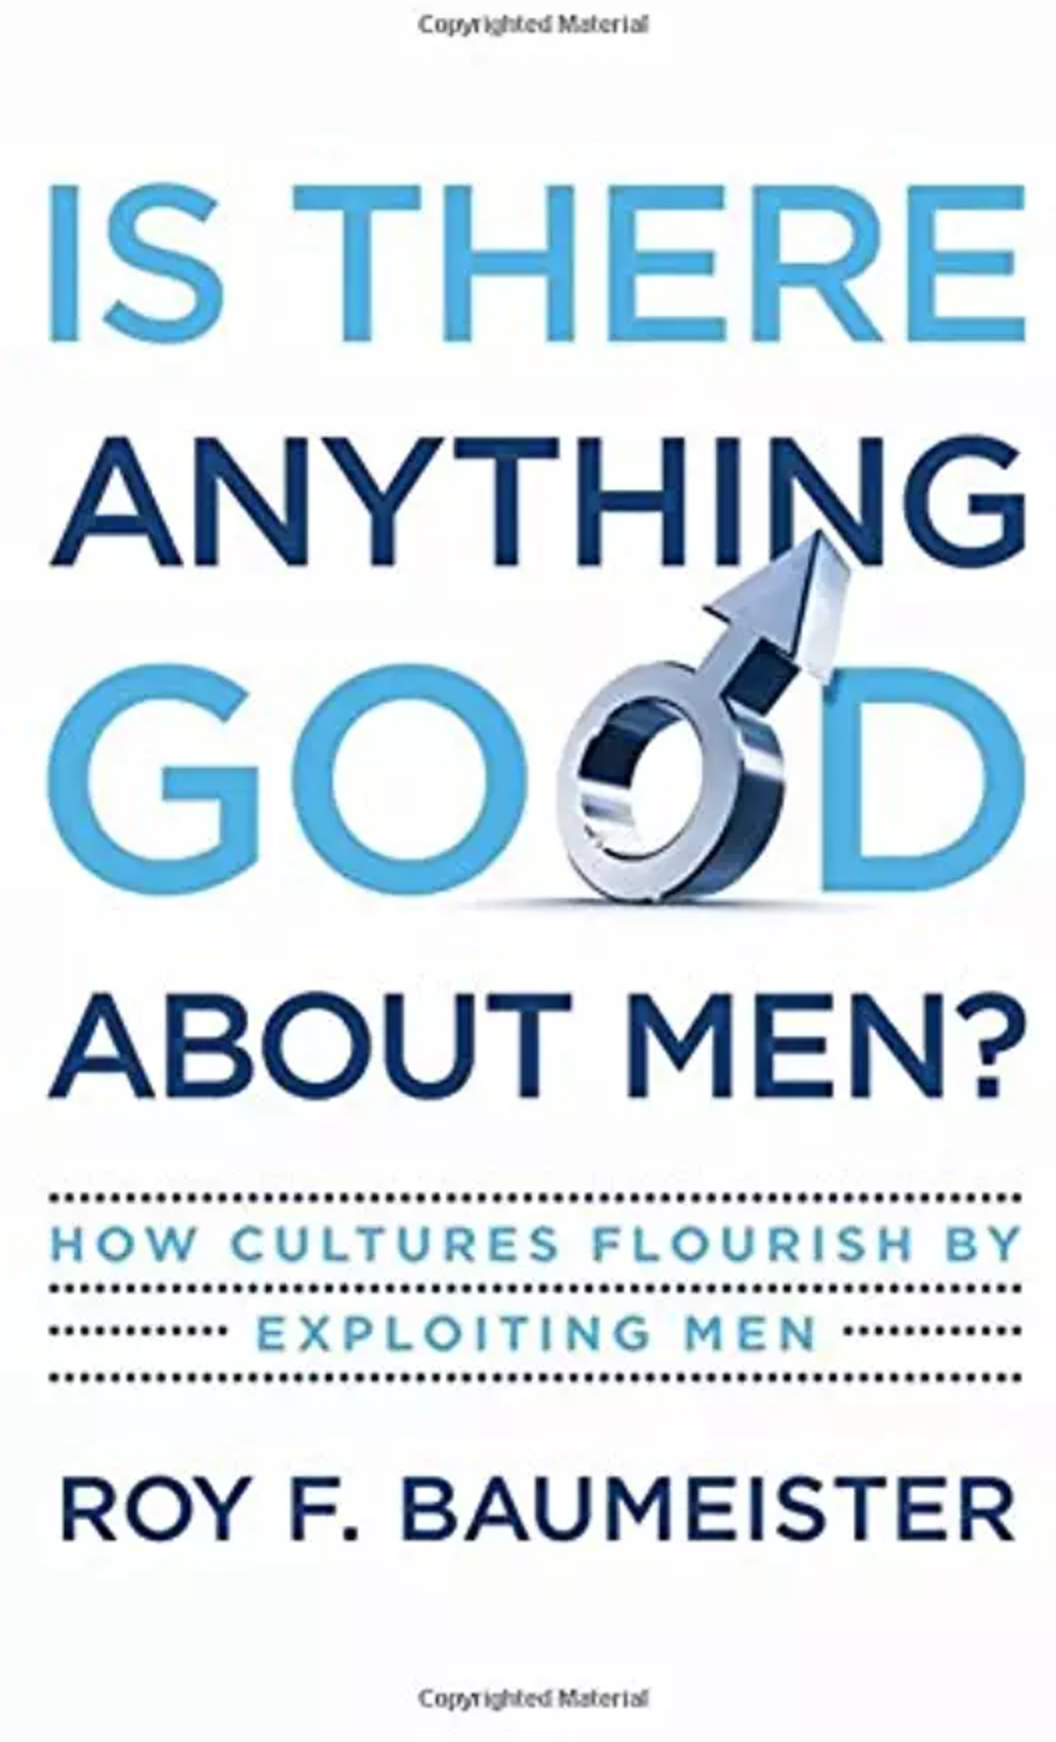 Book cover of "Is There Anything Good About Men?"